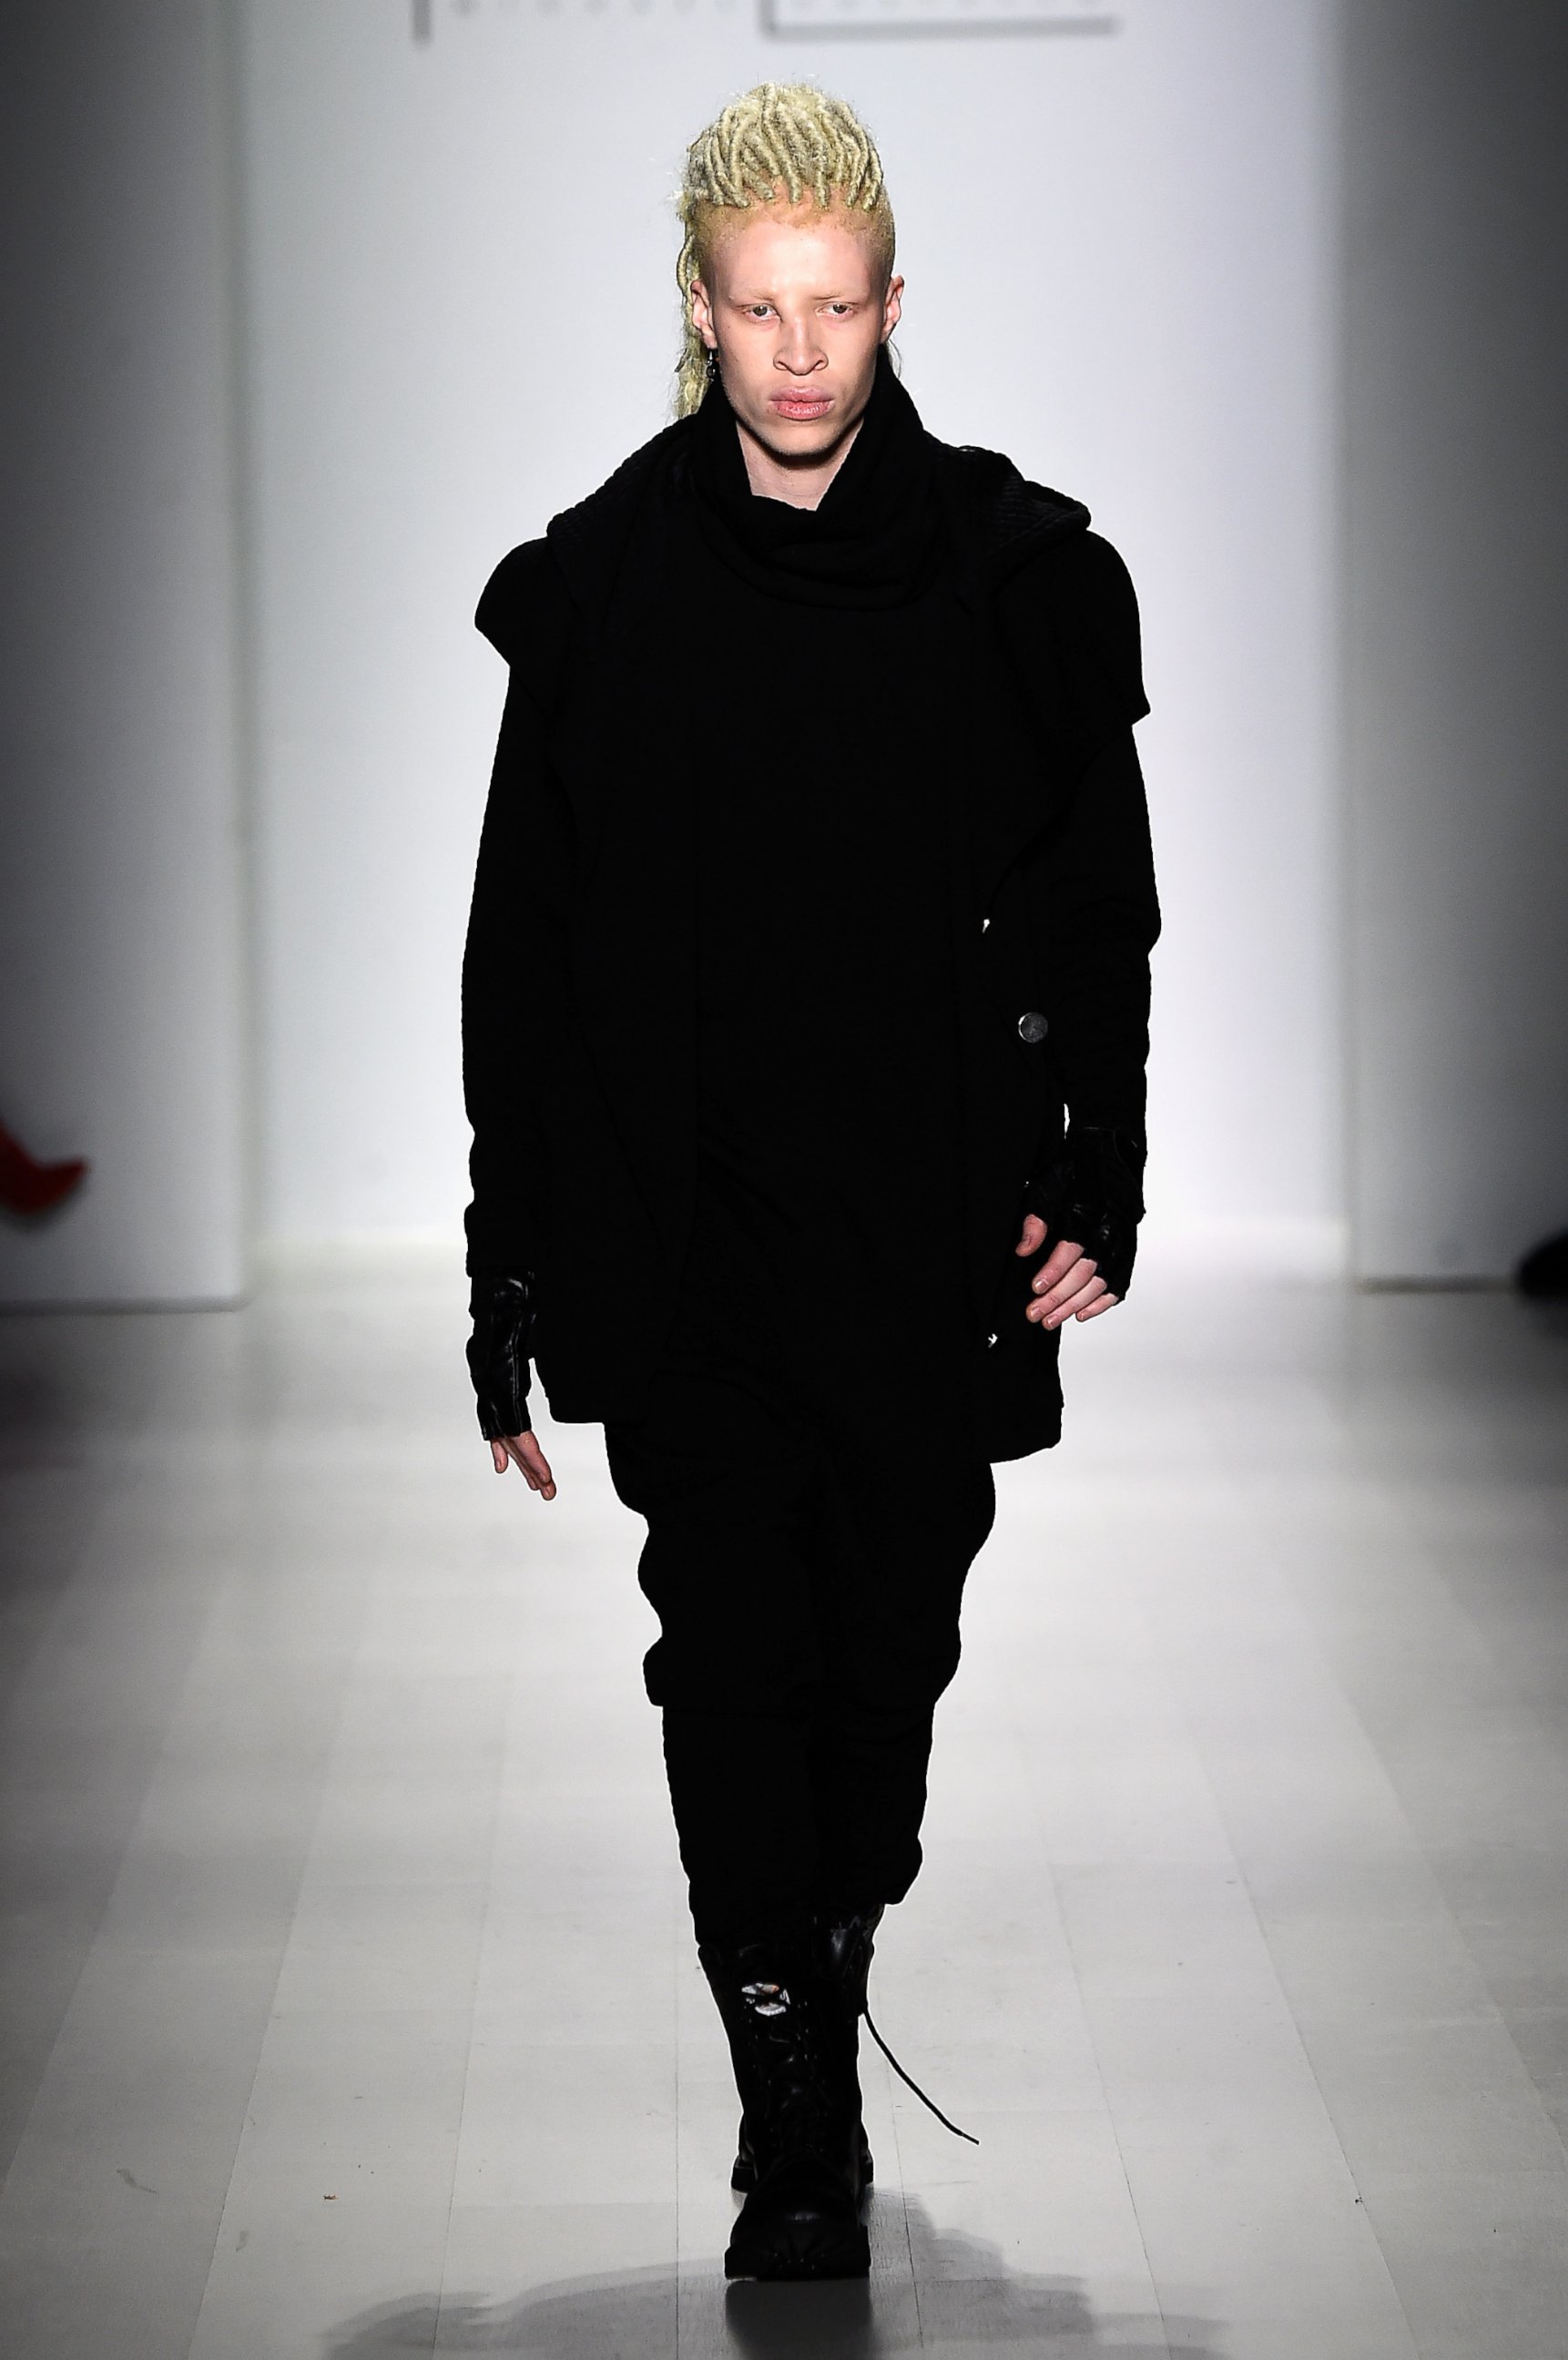 PHOTO:   Model Shaun Ross walks the runway at the Michael Costello fashion show during Mercedes-Benz Fashion Week Fall 2015Salon at Lincoln Center in New York, Feb. 17, 2015.